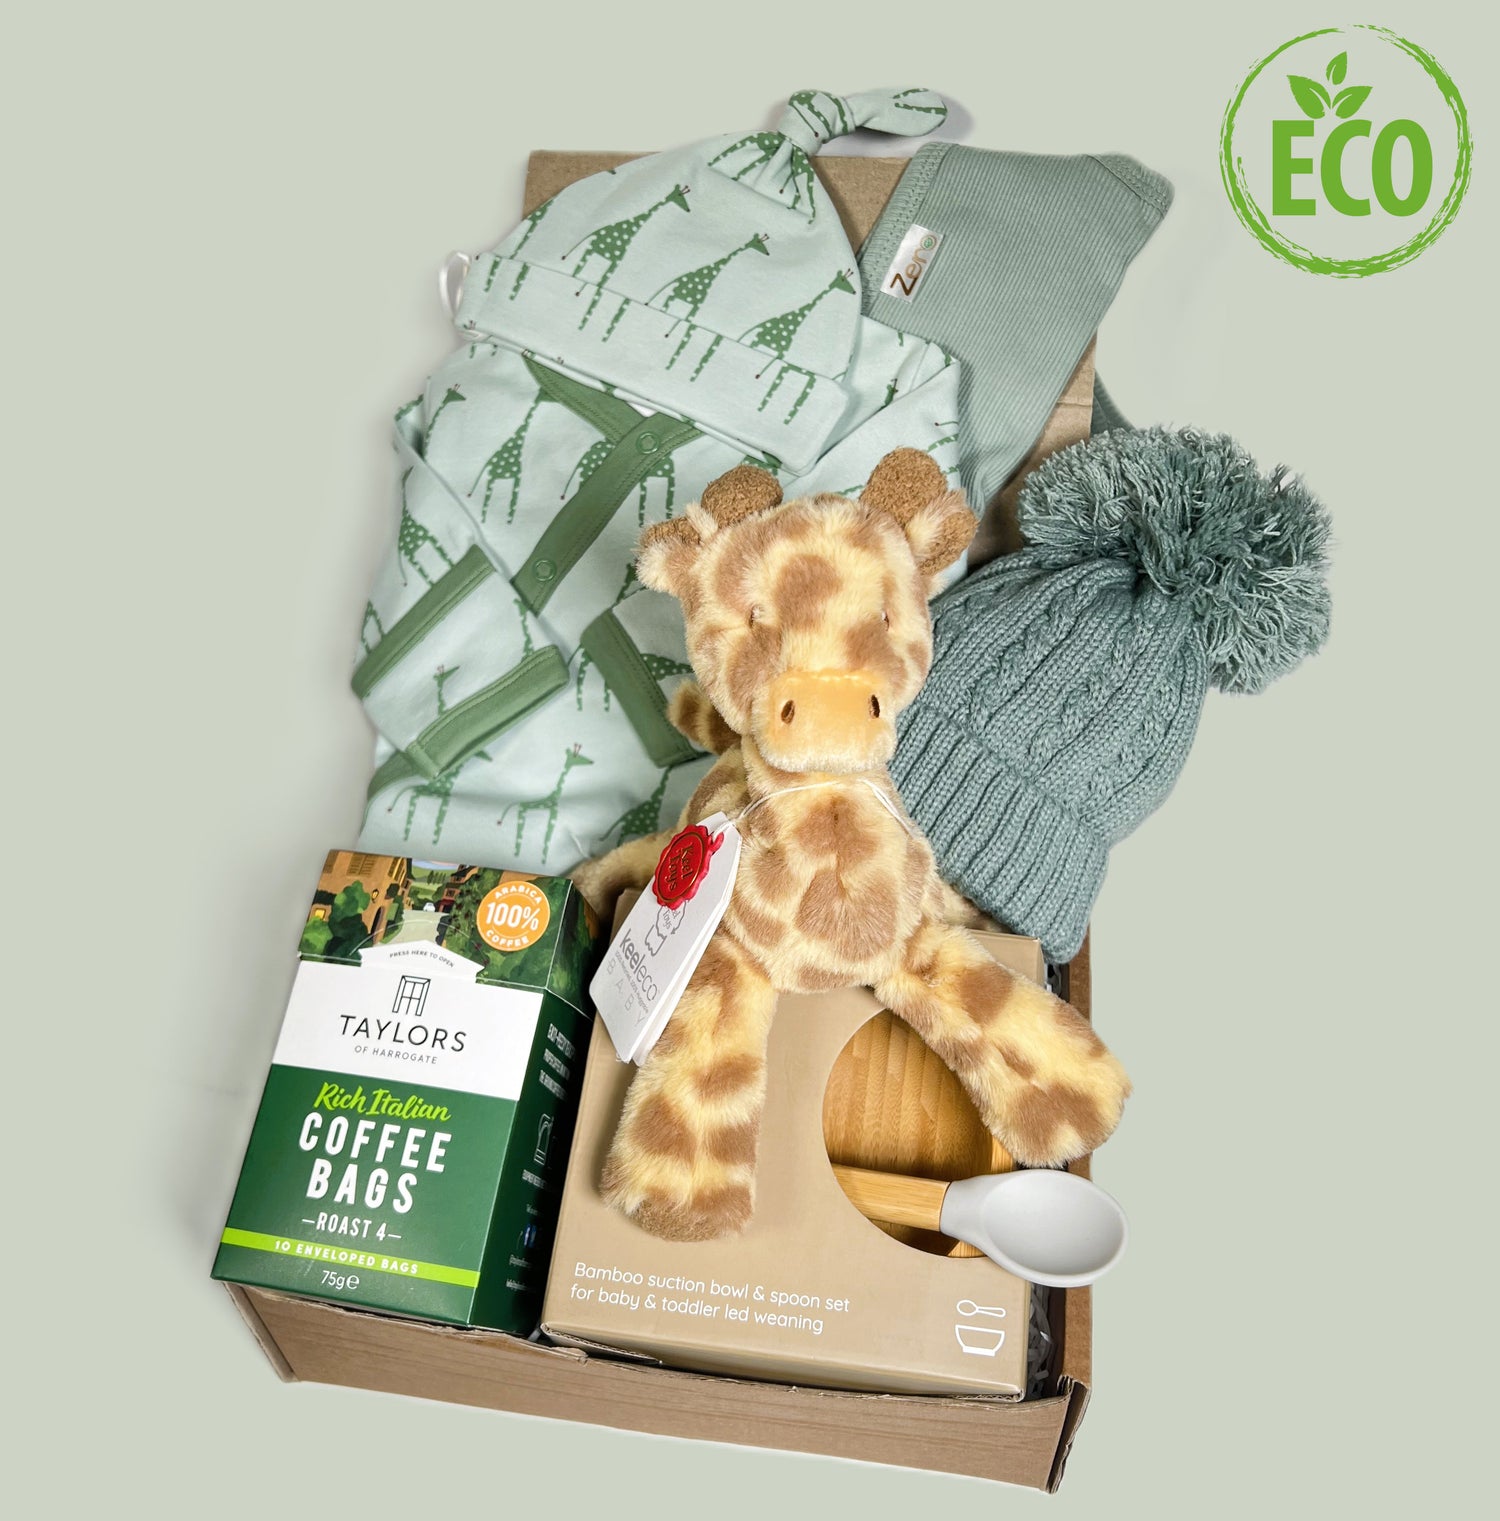 Unisex new Mummy and baby gift hamper with Green organic cotton baby skleep suit with giraffe print and matching bay knot hat, a baby soft toy giraffe, a bamboo baby bowl and spoon weaning set and a green baby pompom hat.